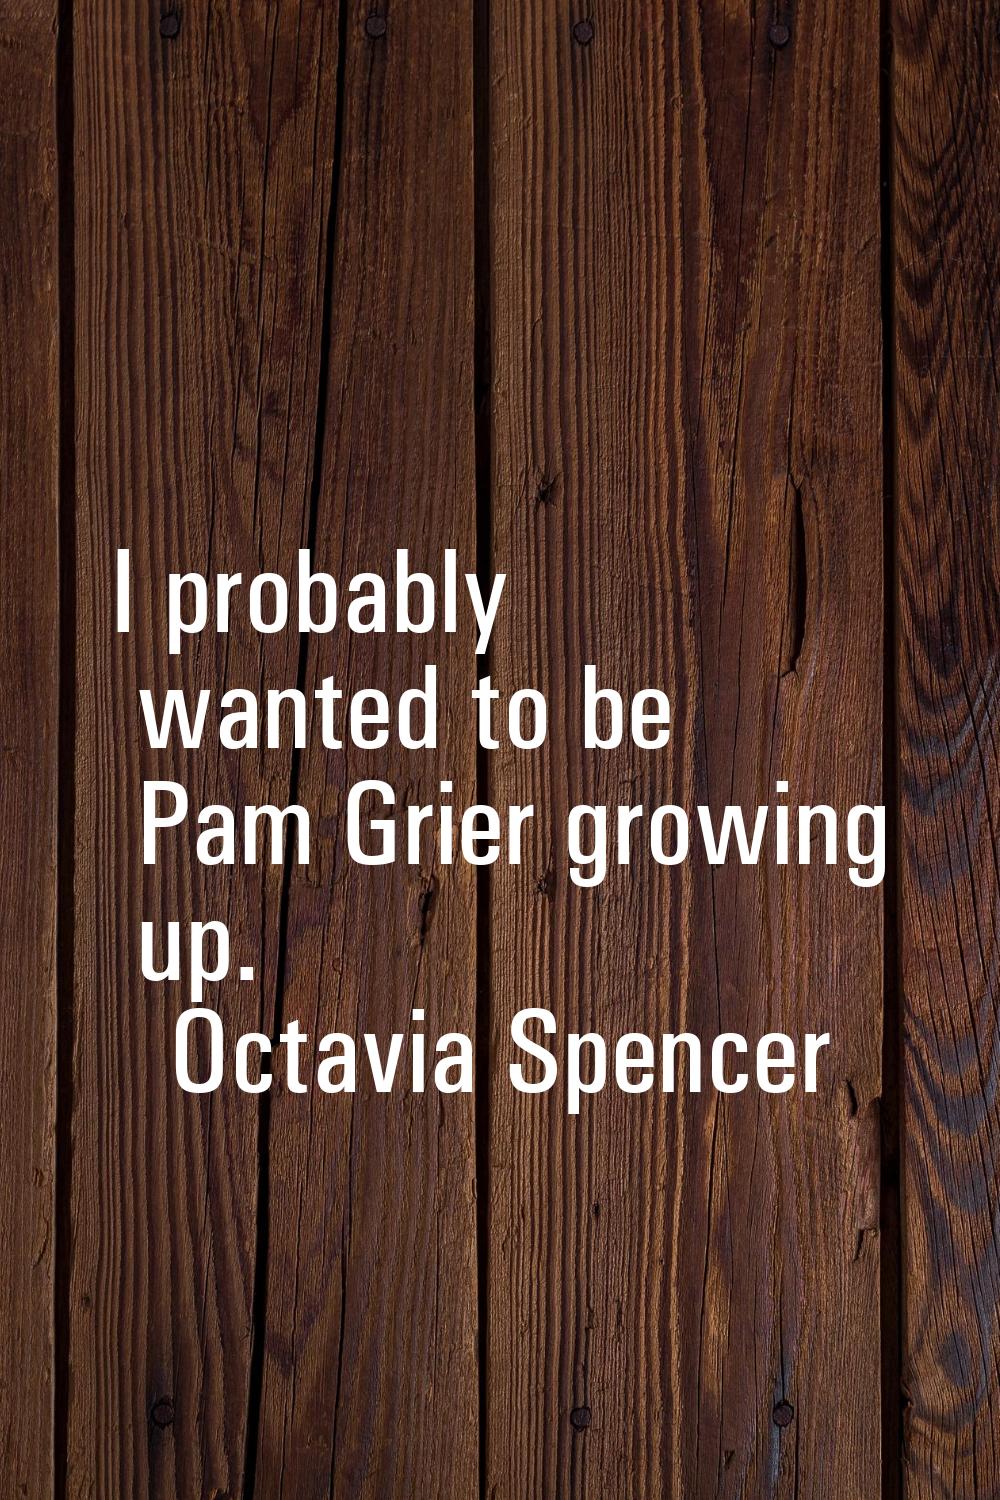 I probably wanted to be Pam Grier growing up.